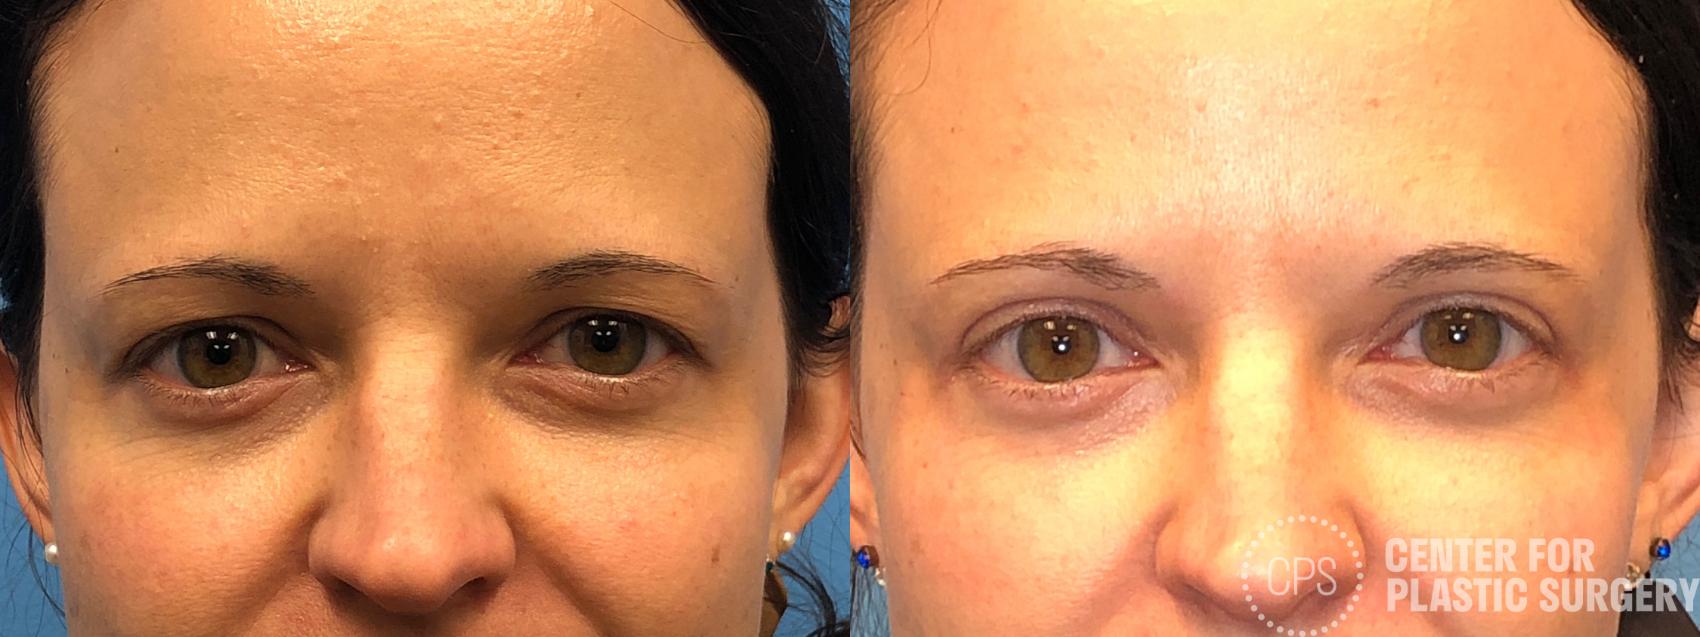 Eyelid Surgery Case 169 Before & After Front | Chevy Chase & Annandale, Washington D.C. Metropolitan Area | Center for Plastic Surgery